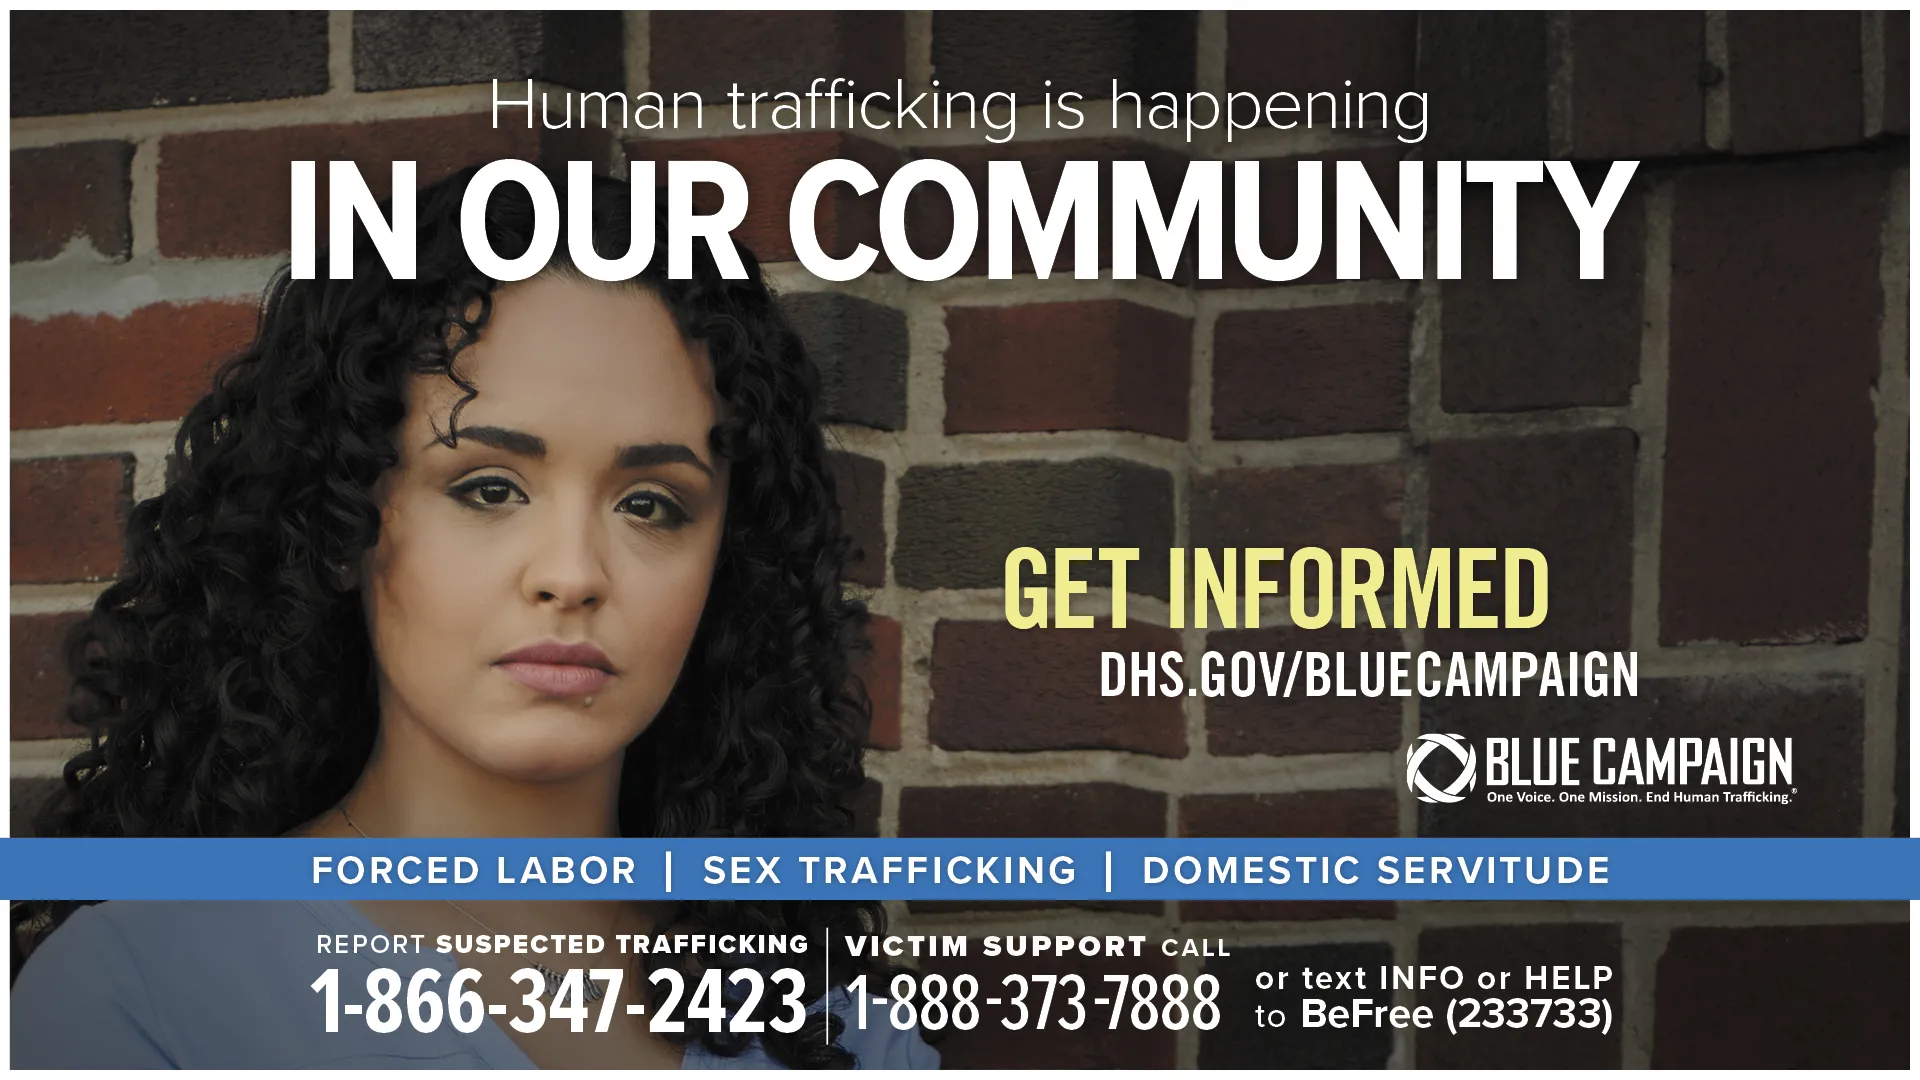 This poster shows a young Hispanic woman in front of a brick wall looking directly into the camera with a neutral expression with the text “Human trafficking is happening in our community. Get informed. DHS.gov/BlueCampaign. Forced Labor, Sex Trafficking, Domestic Servitude. Report suspected trafficking: 1-866-347-2423. Victim support call: 1-888-373-7888 or text INFO or HELP to BeFree (233733).”